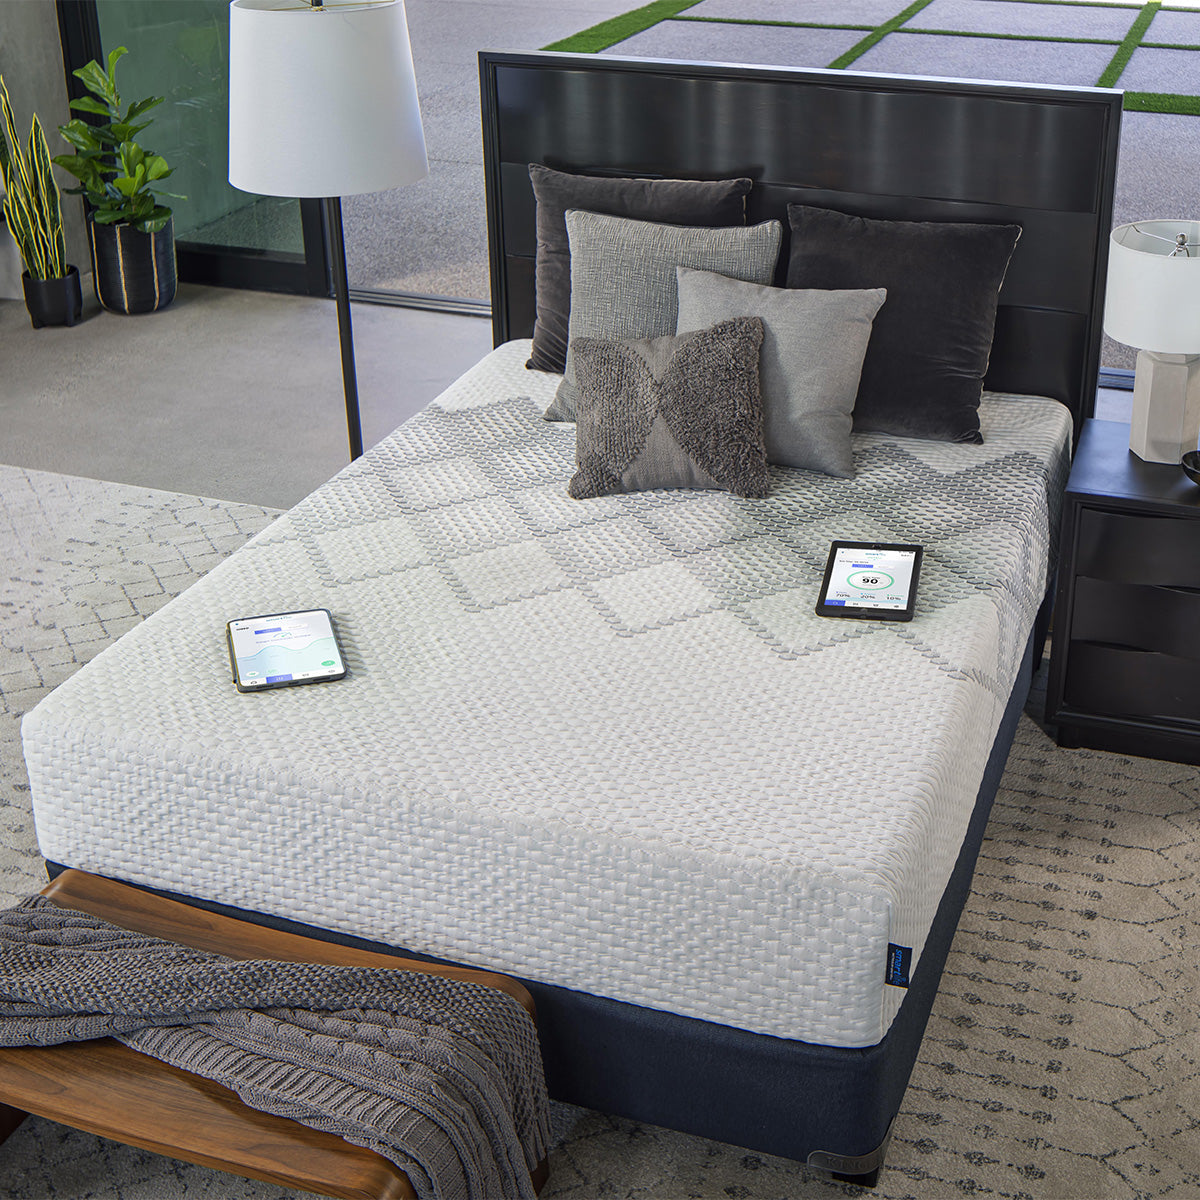 SmartLife Lily Medium Mattress in a bedroom with smart devices connected to change mattress settings